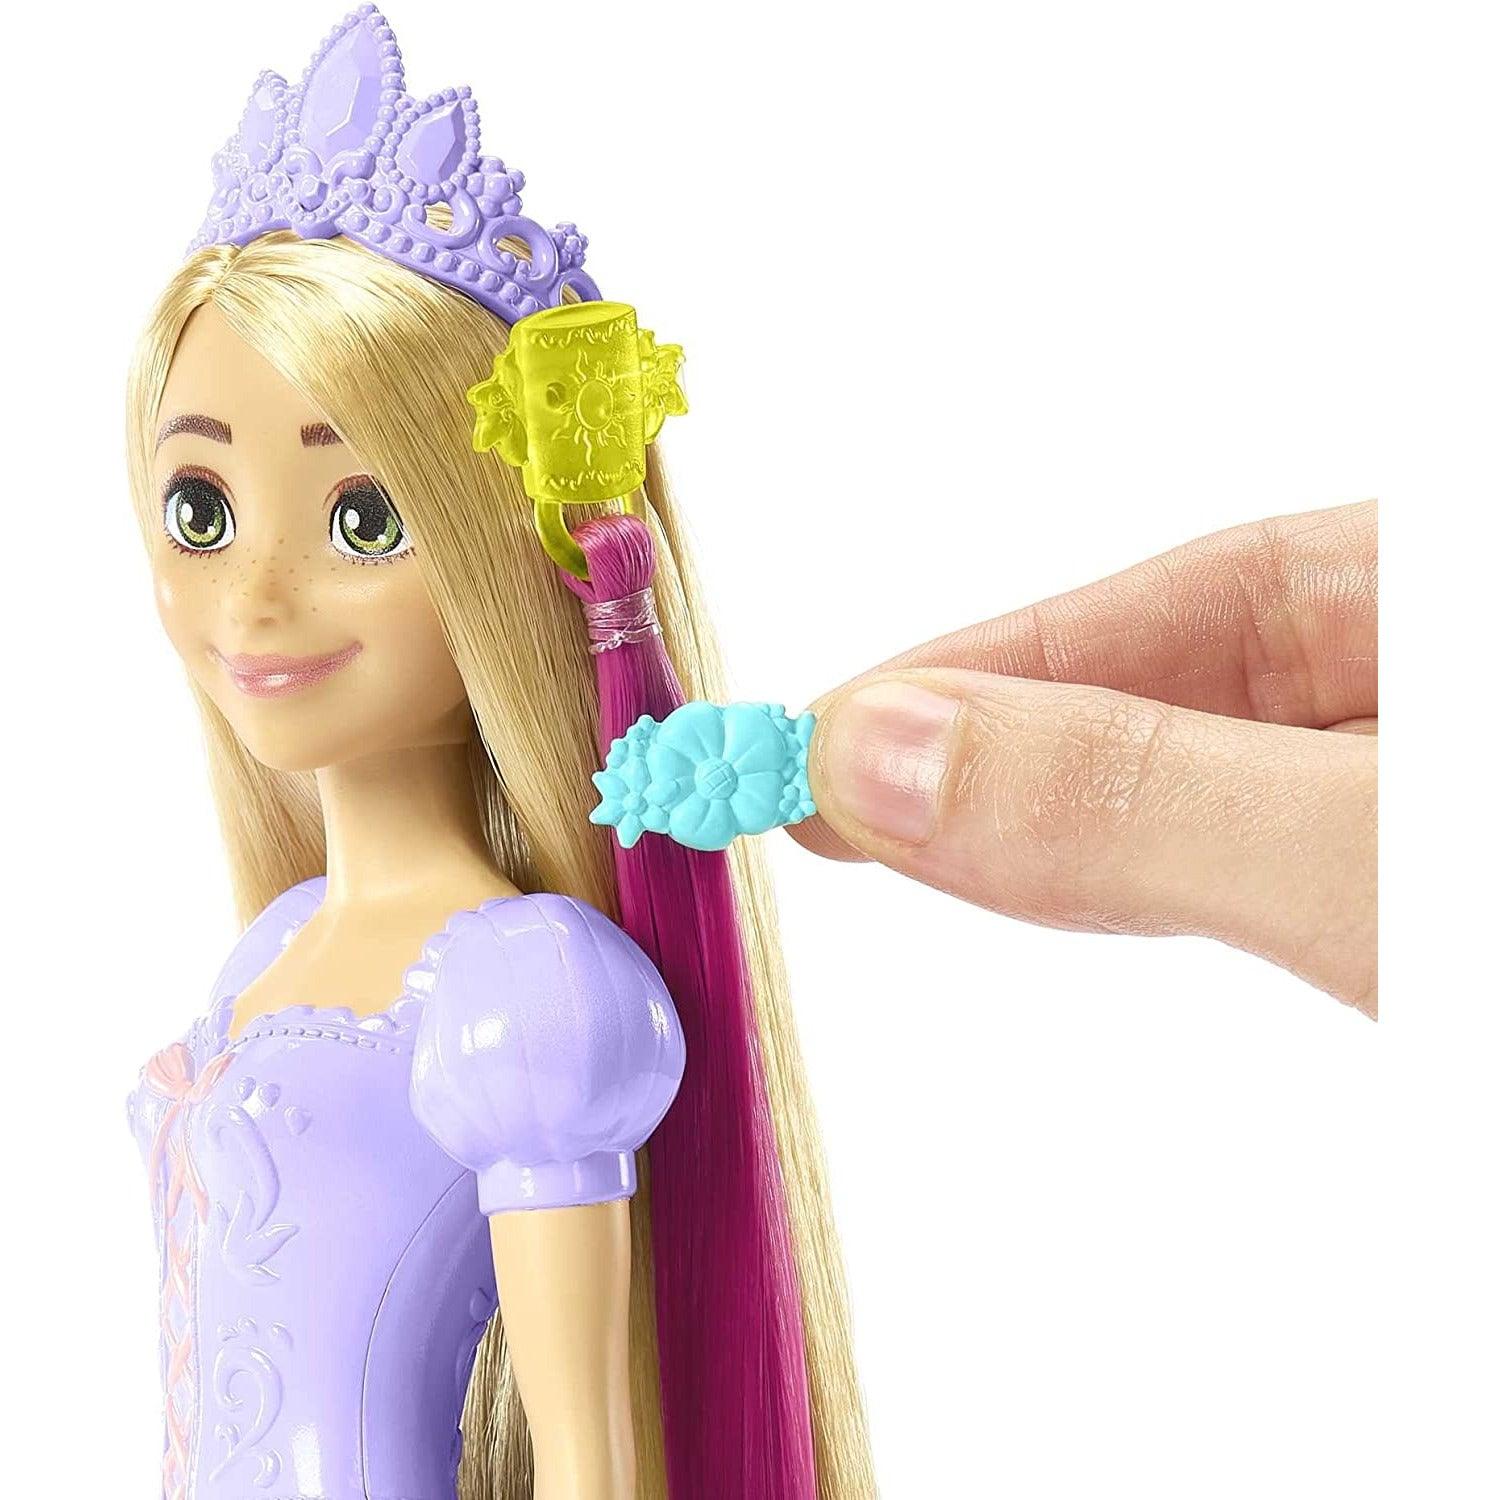 Mattel Disney Princess Rapunzel Fashion Doll with Long Fairy-Tale Hair, 2 Color-Change Hair Extensions & 10 Hairstyling Pieces - BumbleToys - 5-7 Years, Boys, Disney Princess, Fashion Dolls & Accessories, Girls, Pre-Order